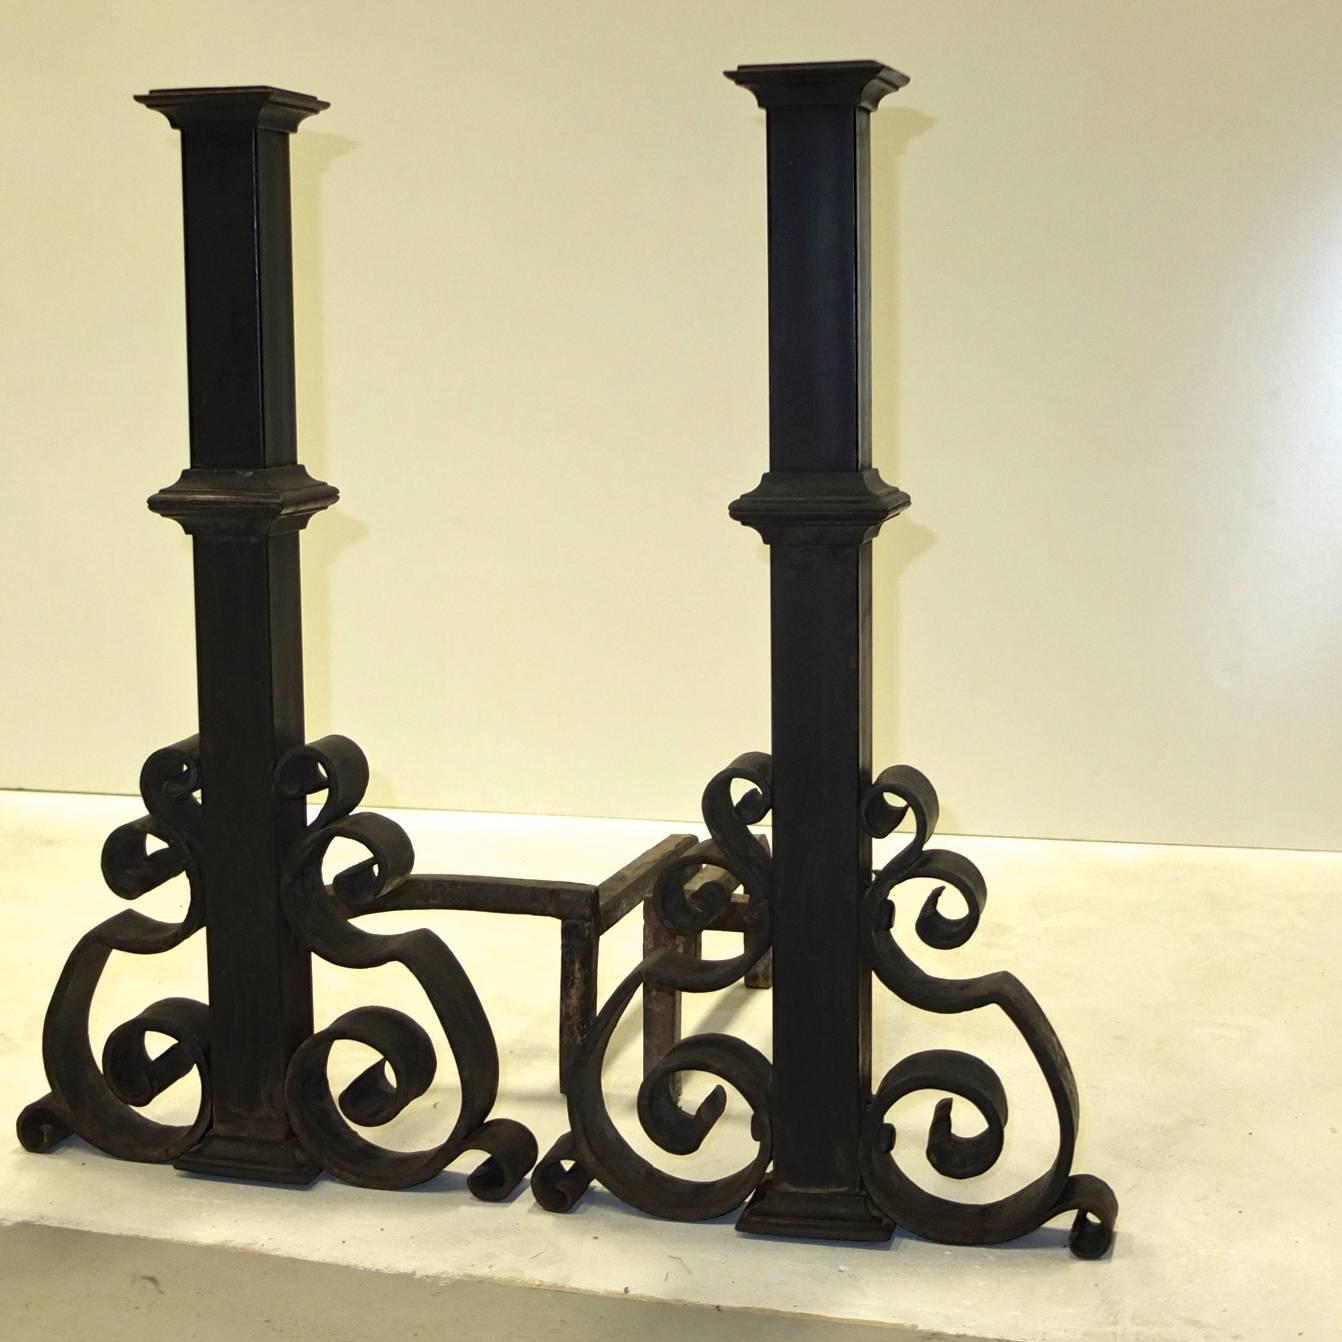 20th Century Antique Pair of Cast and Wrought Iron Andirons